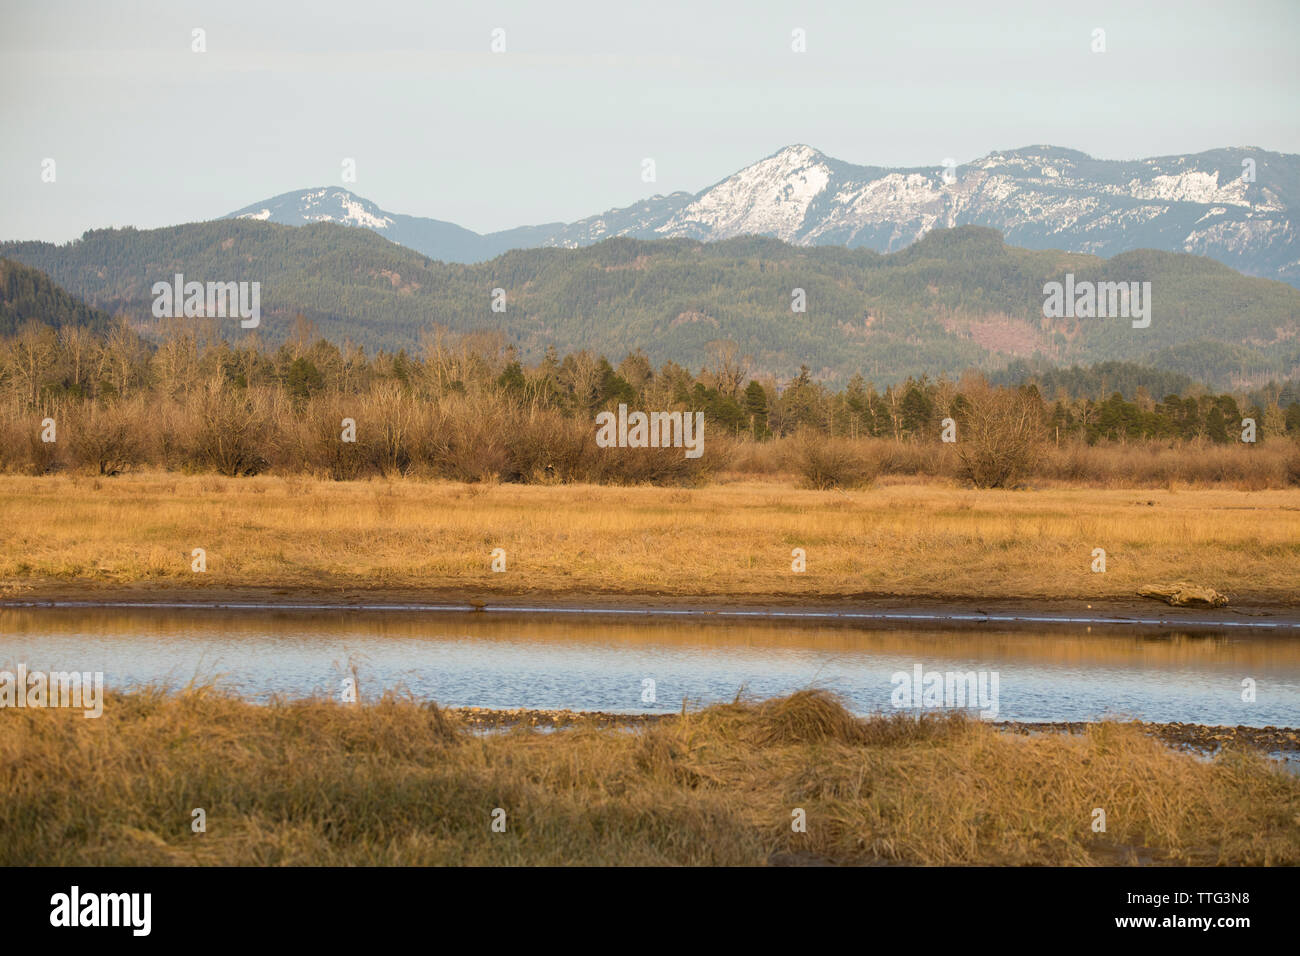 Landscape view of Harrison River estuary and Cascade Mountains. Stock Photo